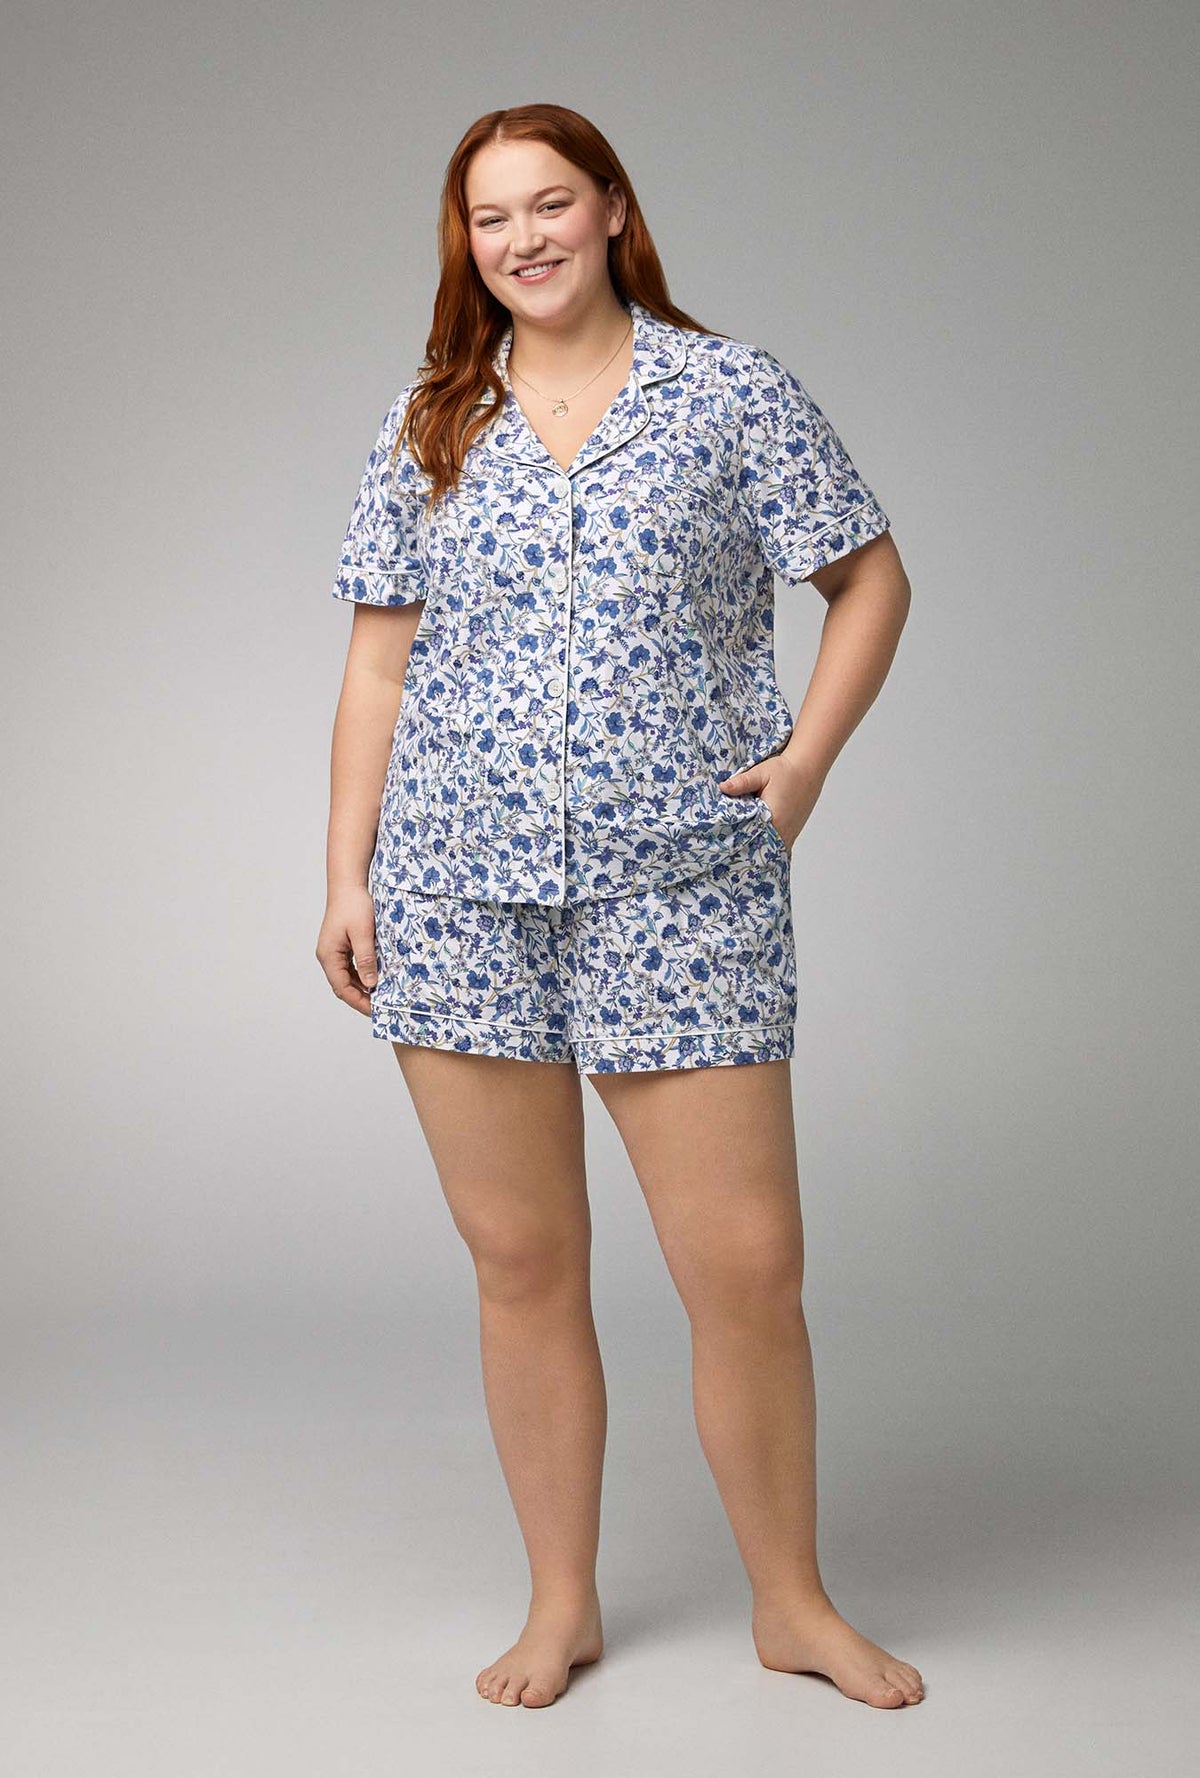 A lady wearing Short Sleeve Classic Shorty Stretch Jersey PJ Set with Terrance Floral print